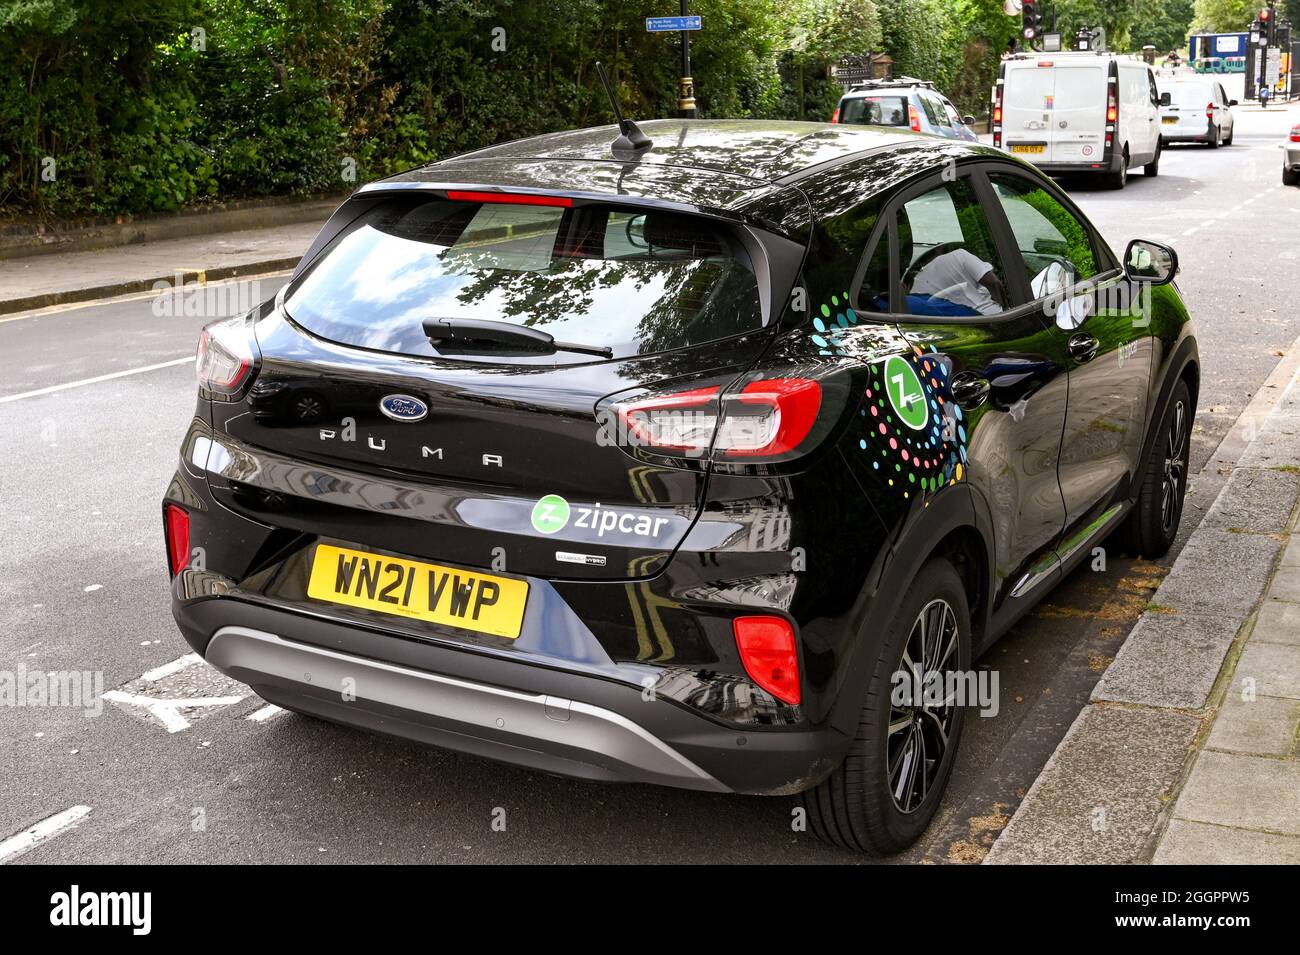 London, England - August 2021: Zipcar parked on a street in central London. The cars, part of a car sharing scheme, are picked up and dropped off Stock Photo